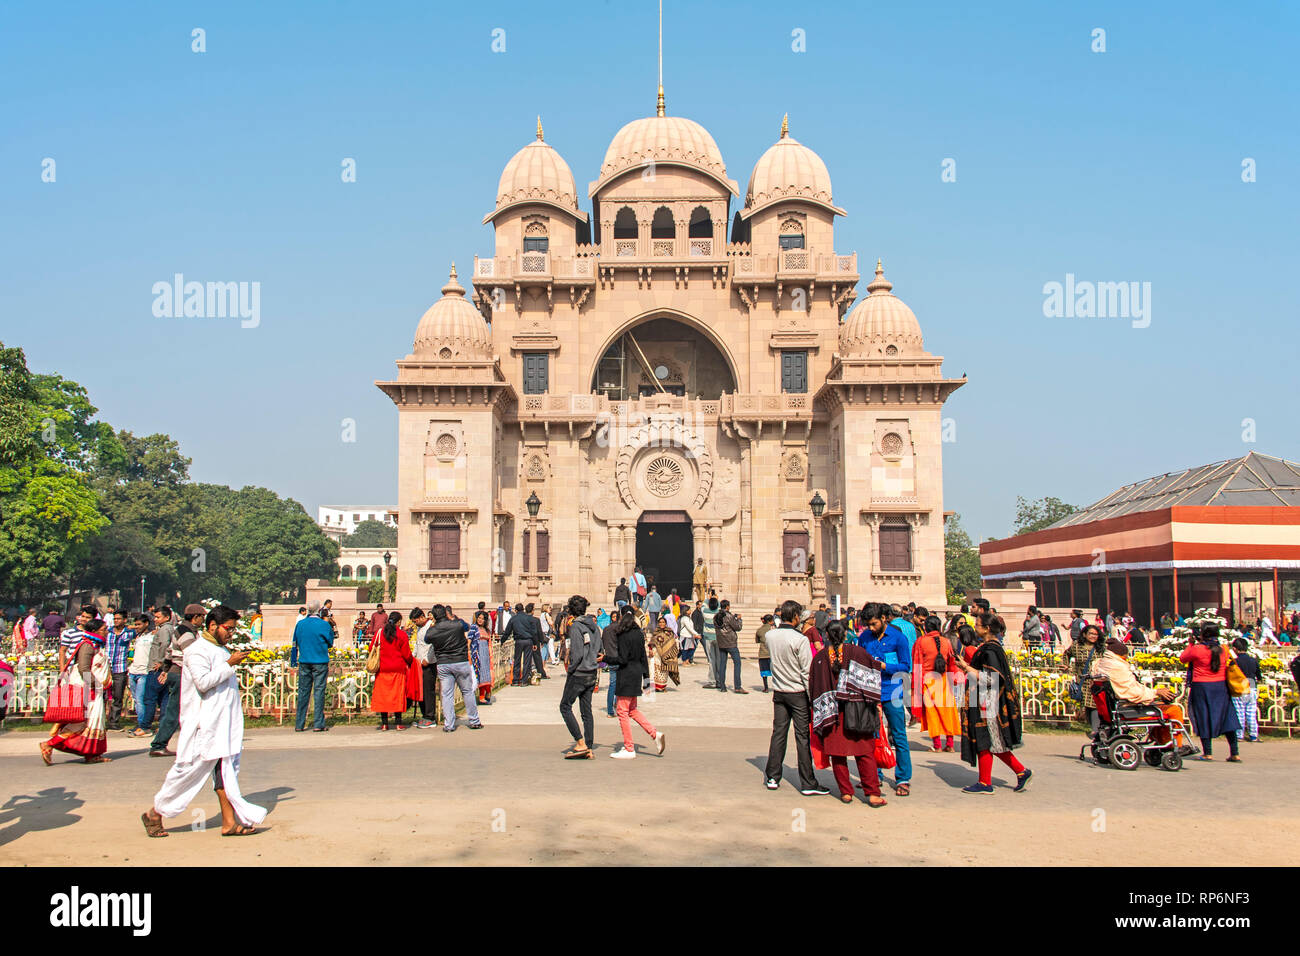 The Belur Math church in Kolkata with tourists and local people walking around and visiting on a sunny day with blue sky. Stock Photo